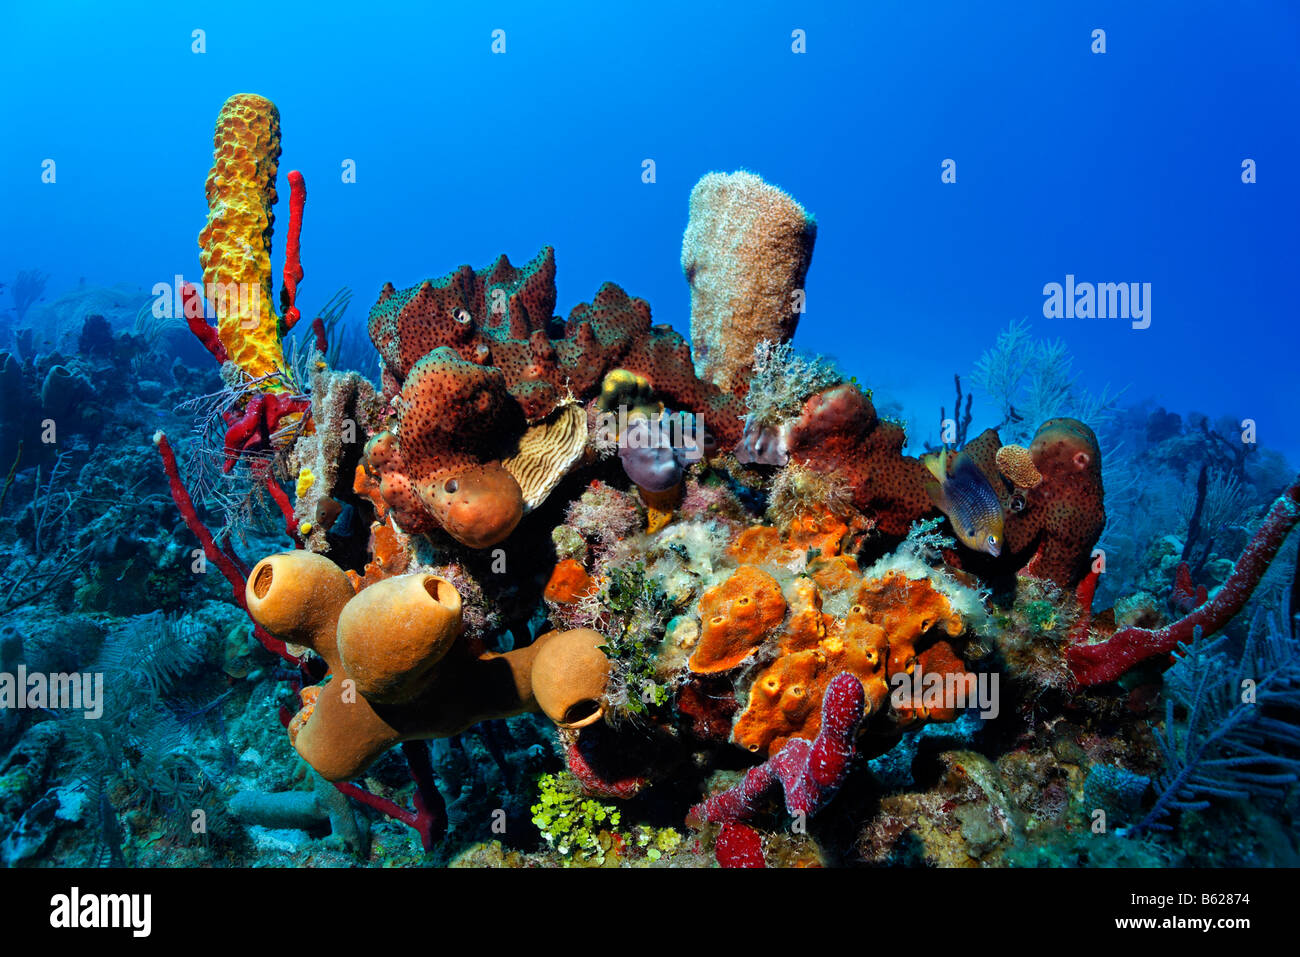 Reef block overgrown with various brightly-coloured sponges, Turneffe Atoll, Belize, Central America, Caribbean Stock Photo